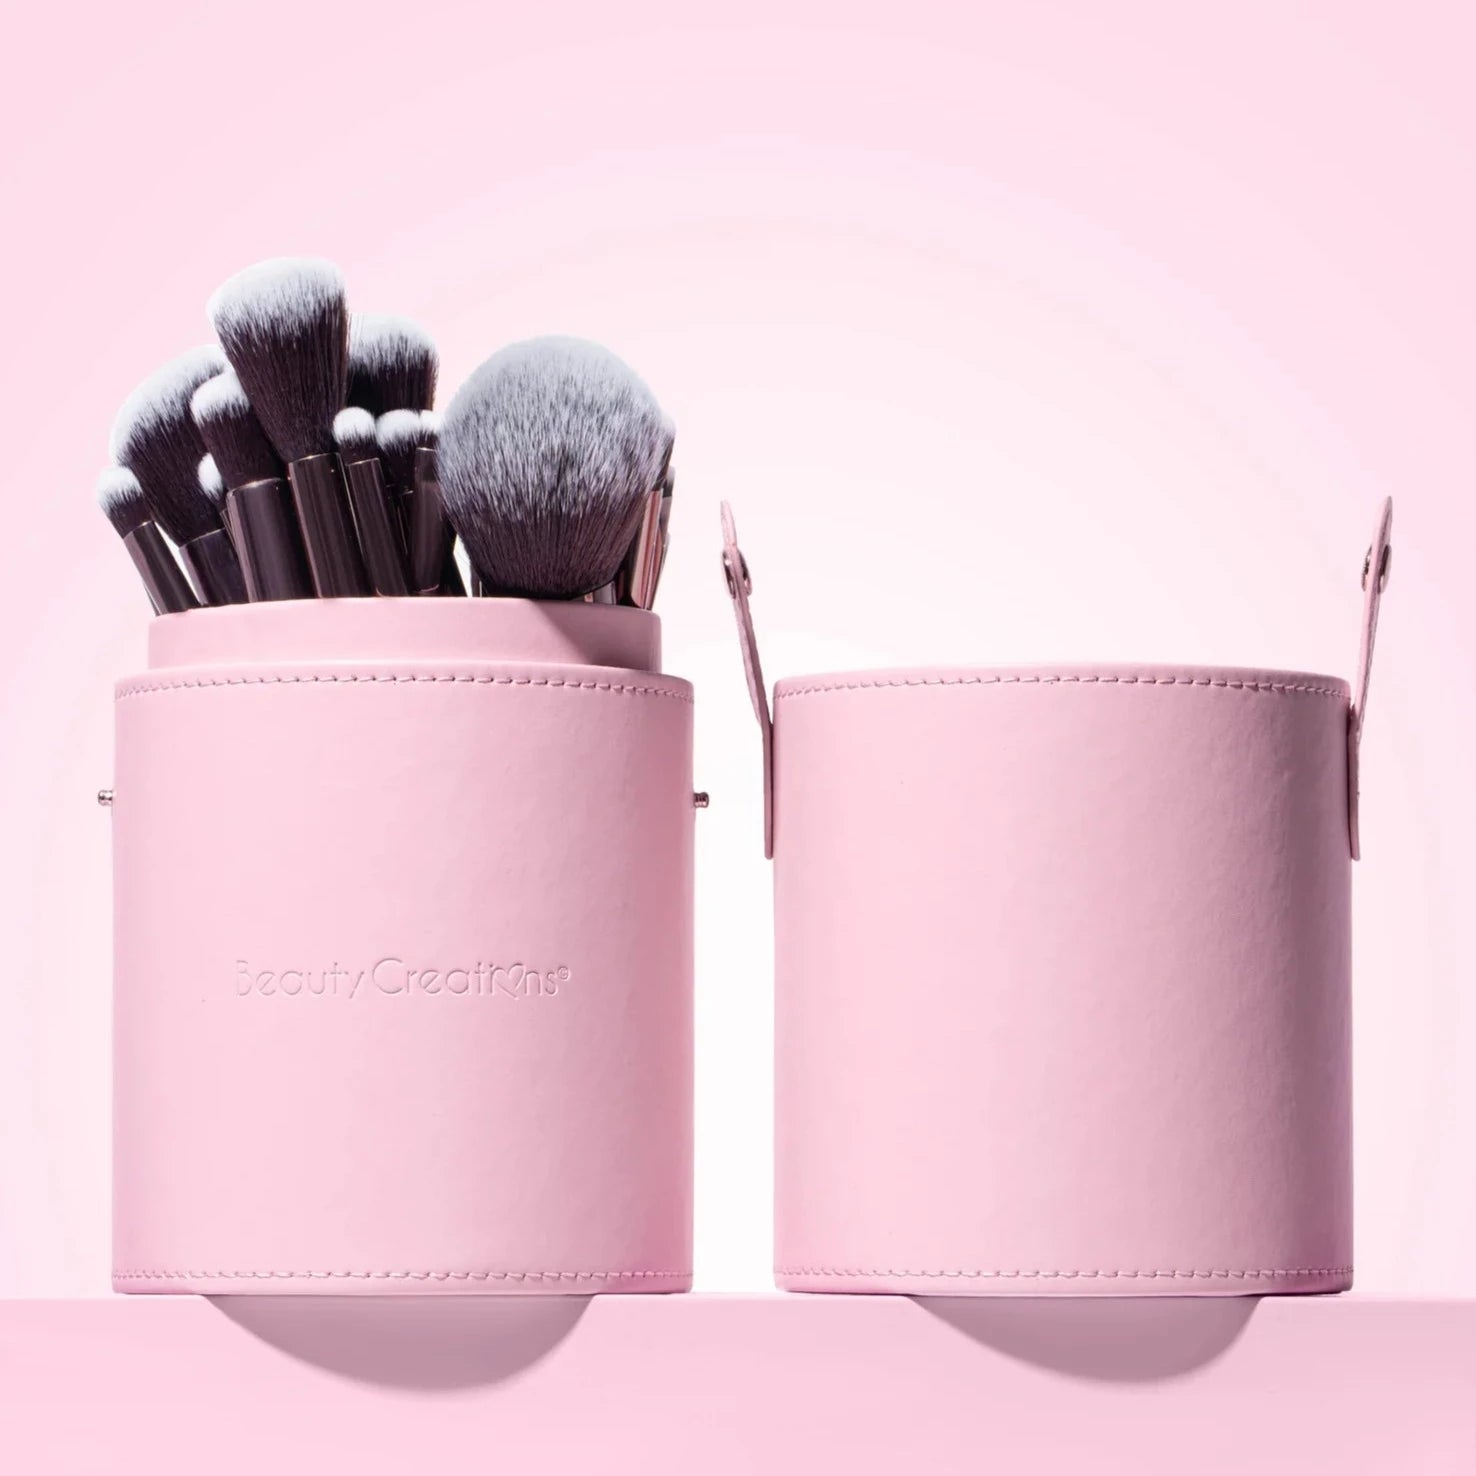 Beauty Creations - Pretty And Perfect 24pc Brush Set